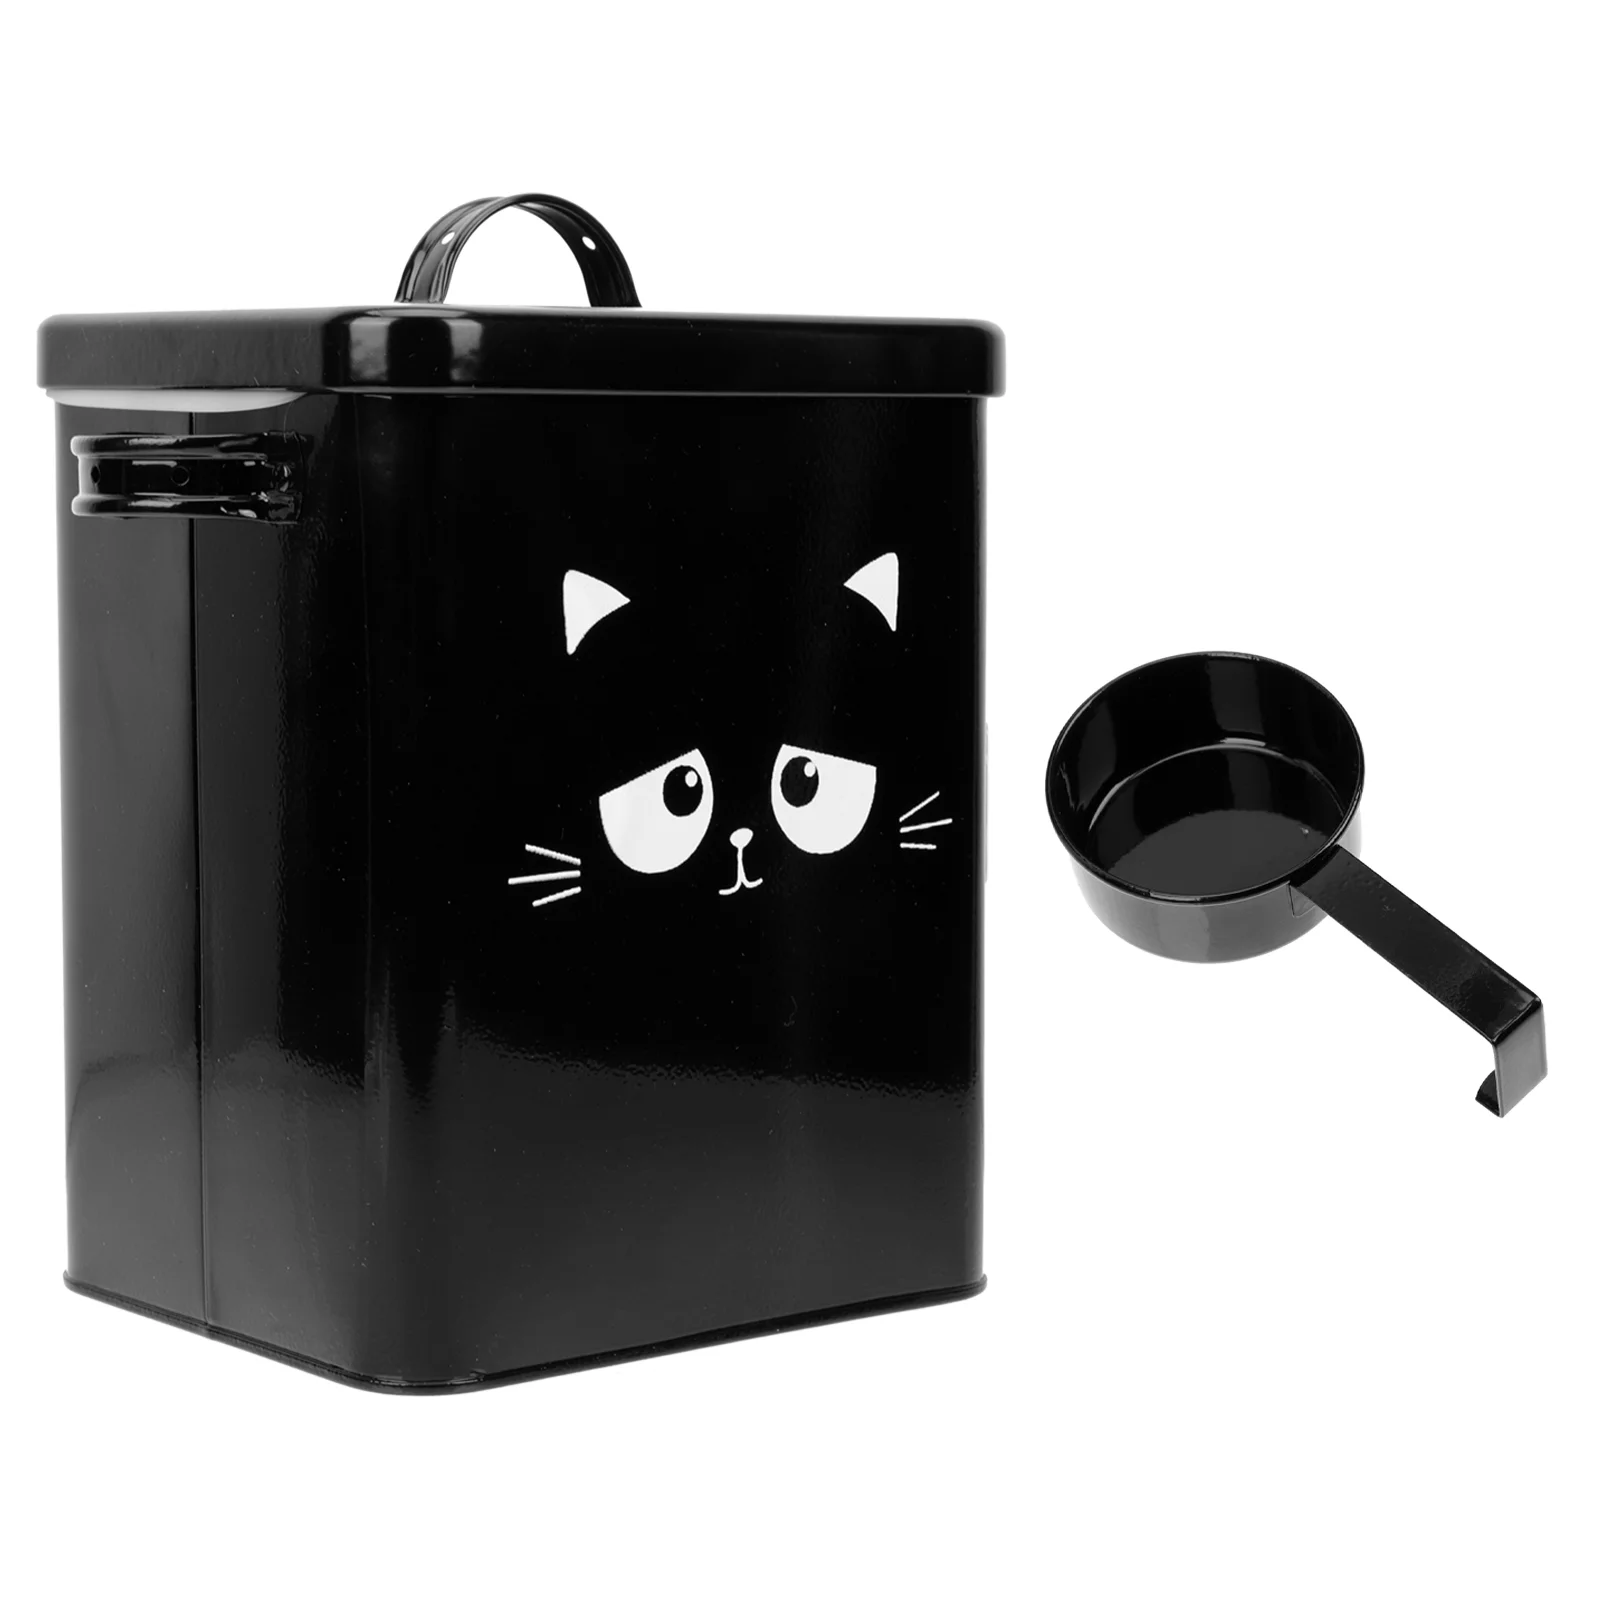 

Storage Pet Dog Container Bucket Sealed Tin Canister Box Containers Large Airtight Cat Galvanized Bins Detergent Laundry Rice